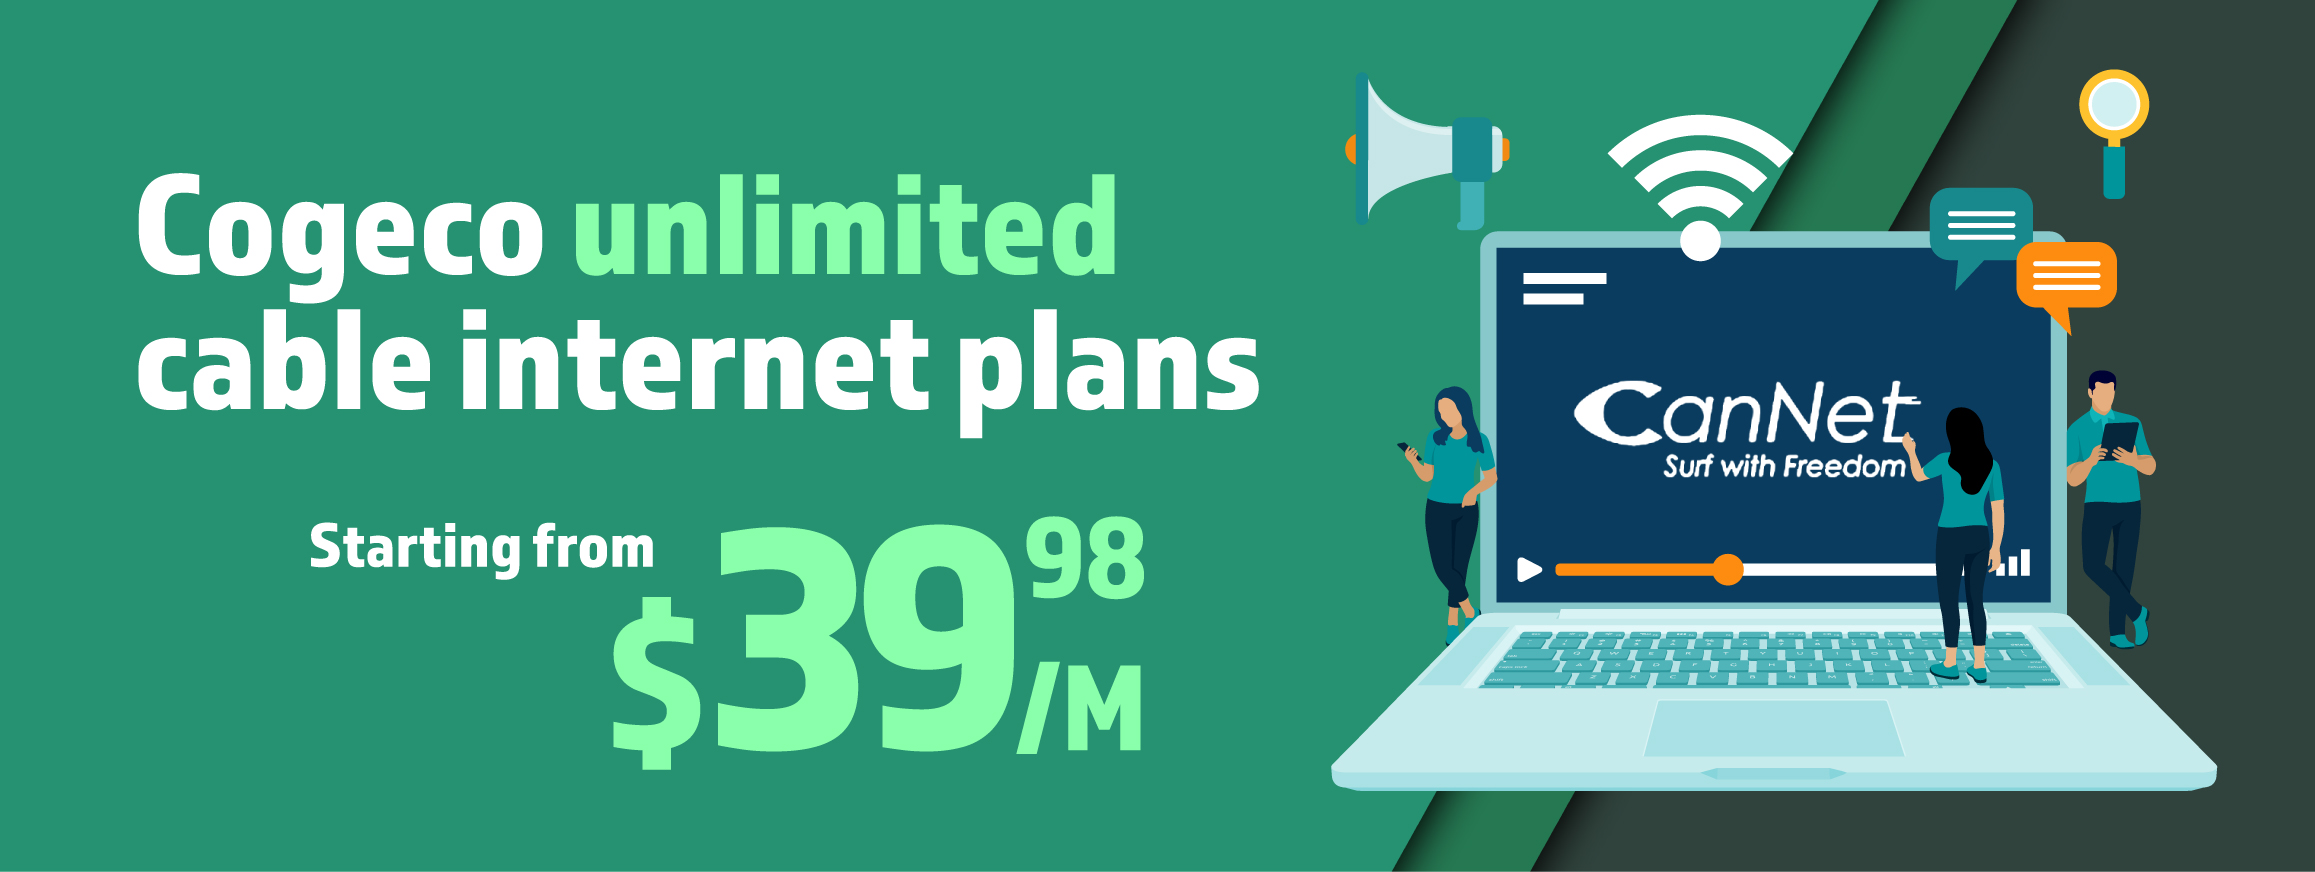 Unlimited high-Speed cable internet plans for Cogeco service area 60Mbps at only $39.38/m or 120 Mbps at only $59.98/m